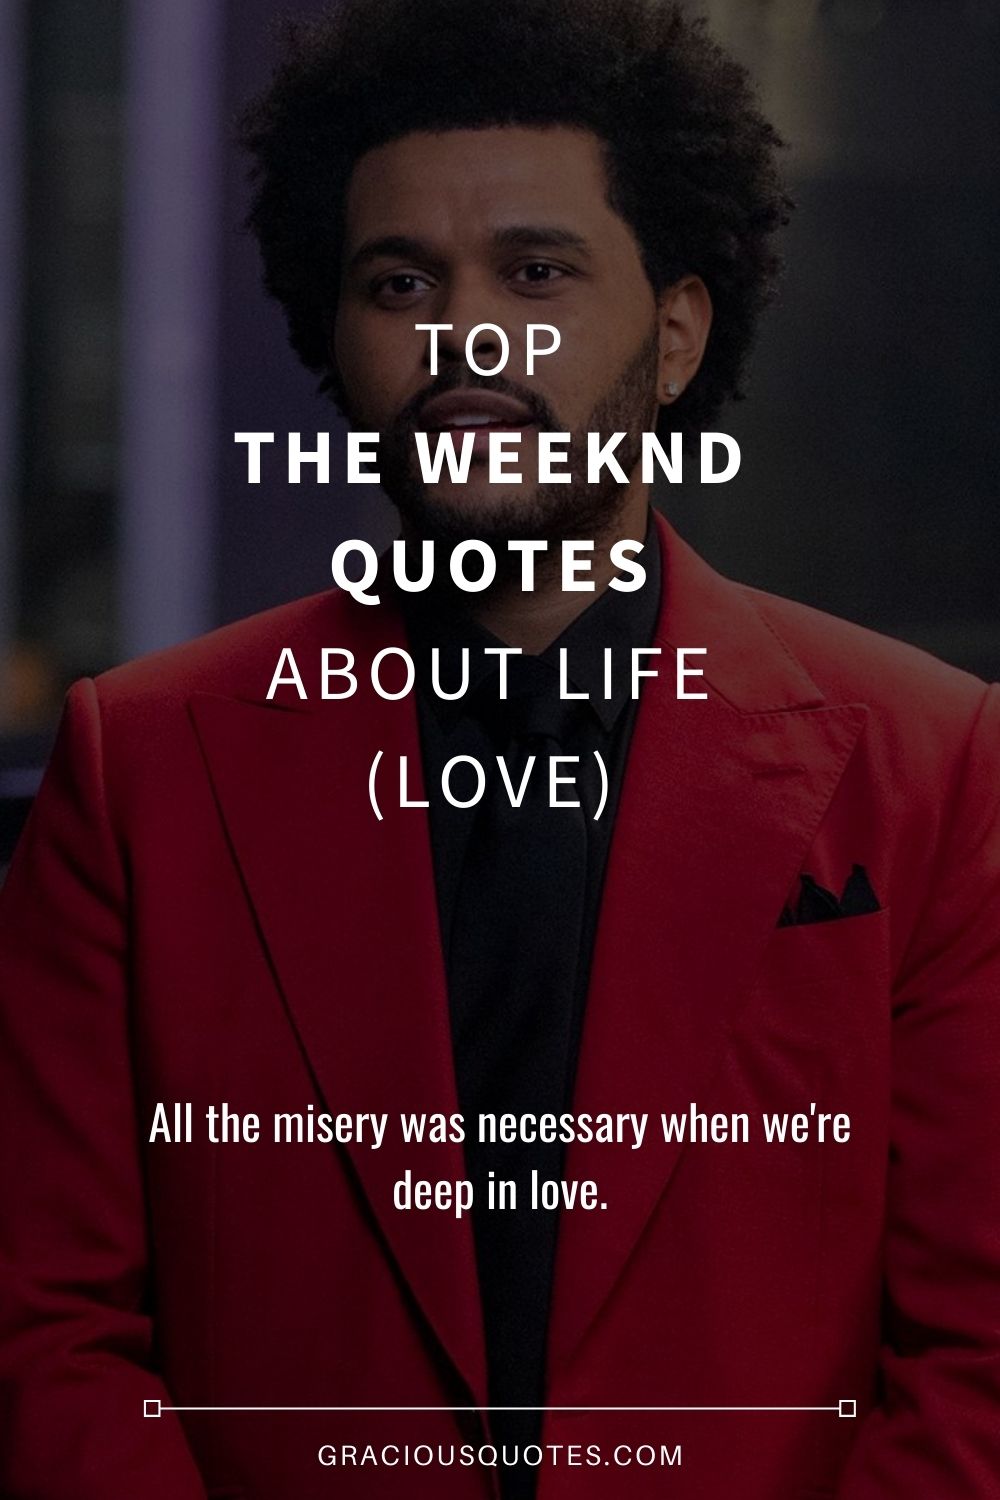 Top The Weeknd Quotes About Life (LOVE) - Gracious Quotes